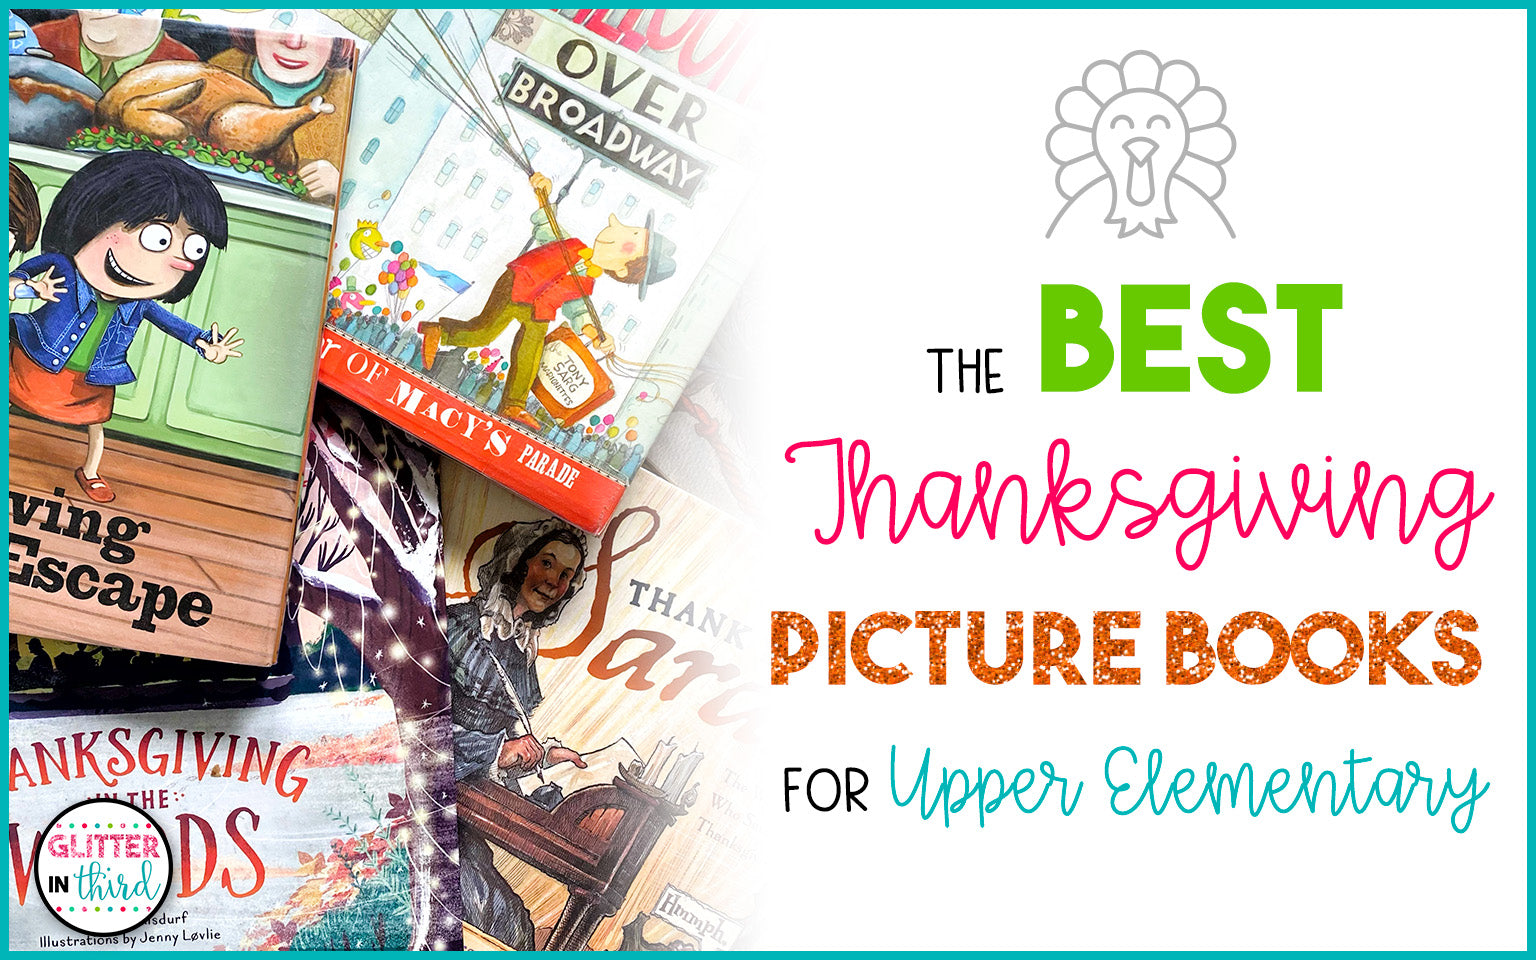 The BEST Thanksgiving Picture Books for Upper Elementary